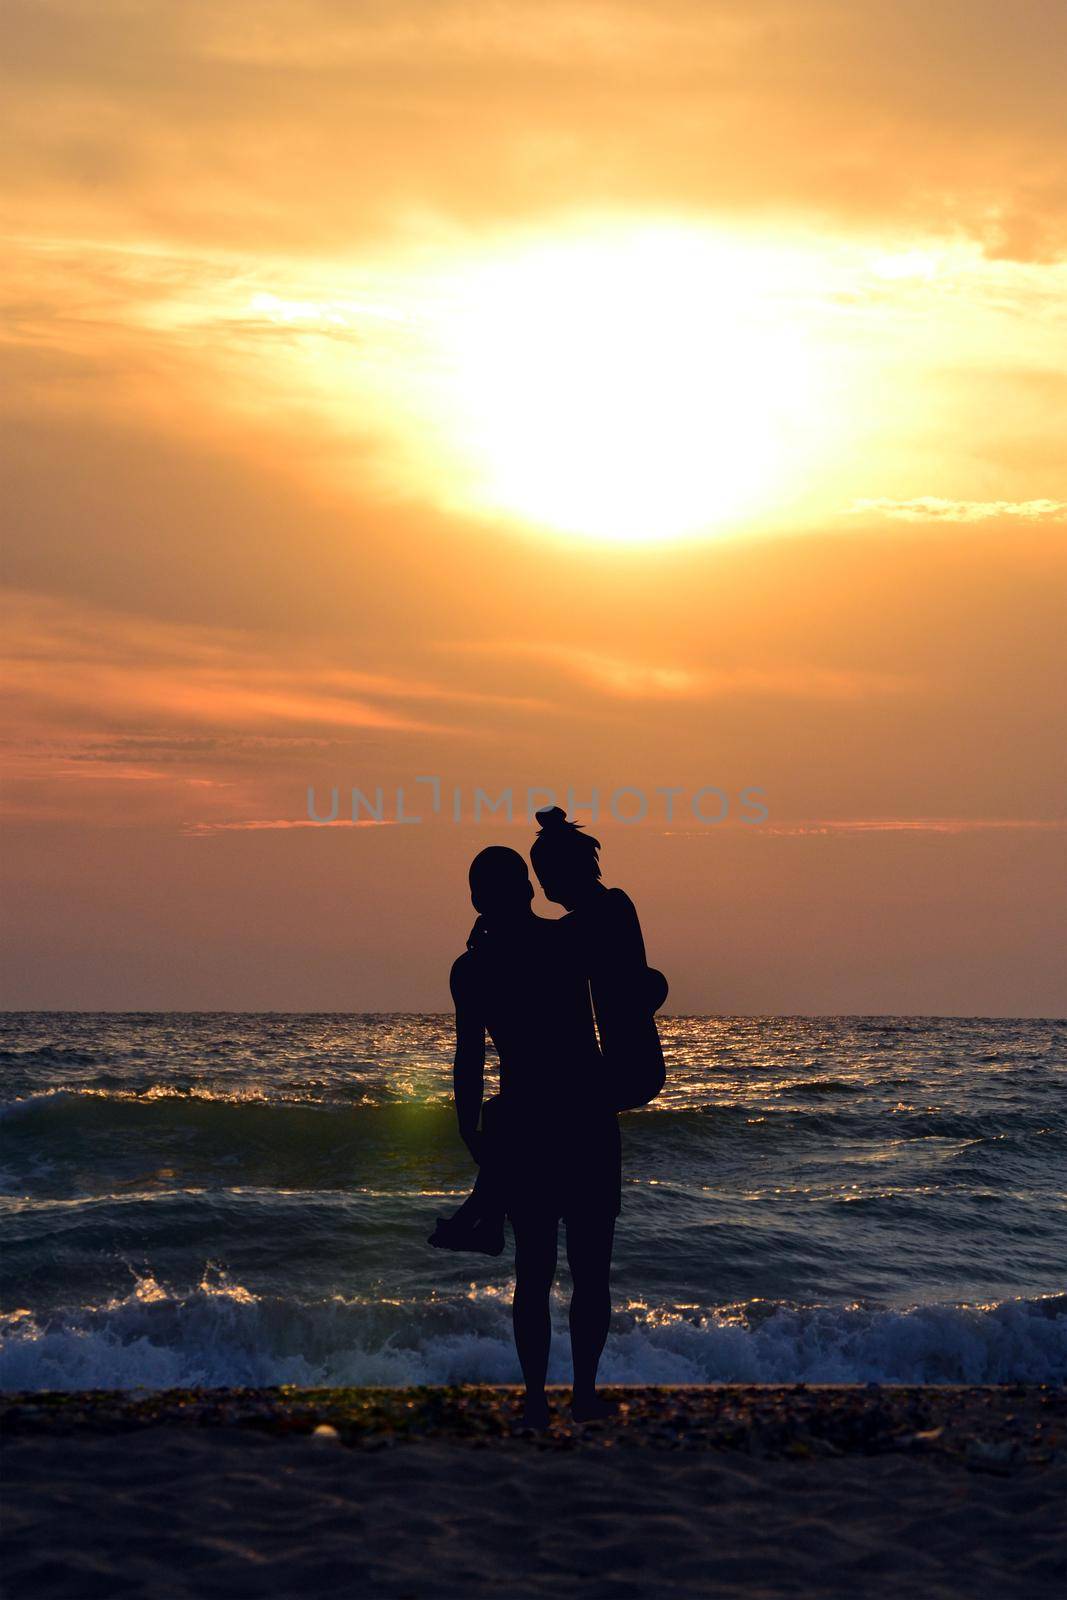 Silhouette of man carrying woman in his arms on the beach at sunset by hibrida13